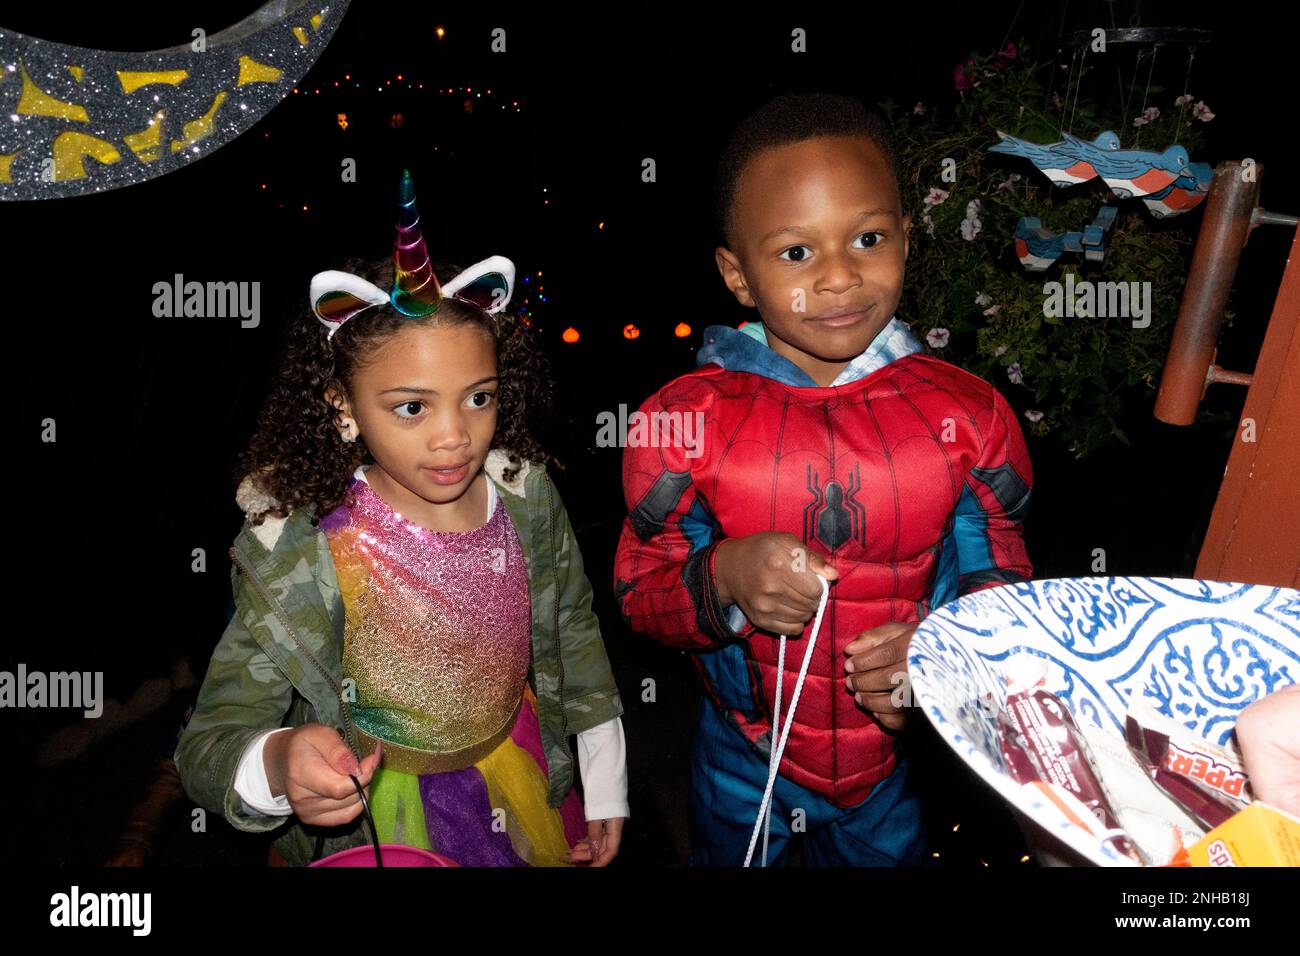 Costumed trick treaters costumed as a unicorn and Spiderman. St Paul Minnesota MN USA Stock Photo